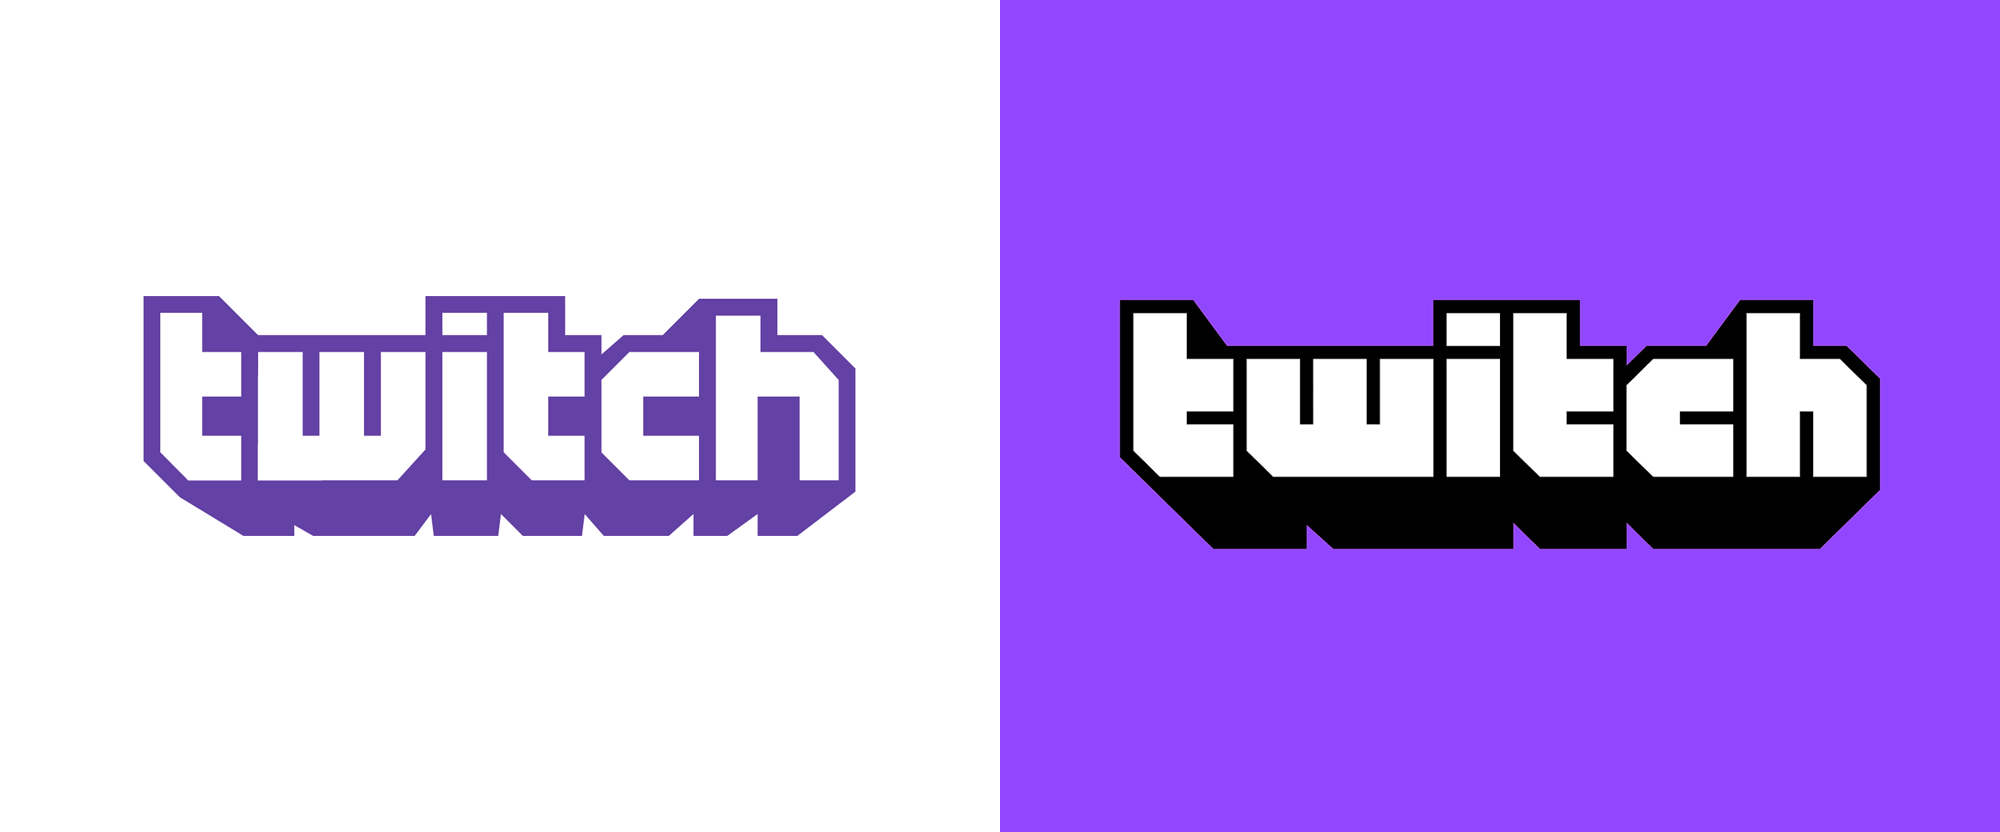 twitch_logo_before_after